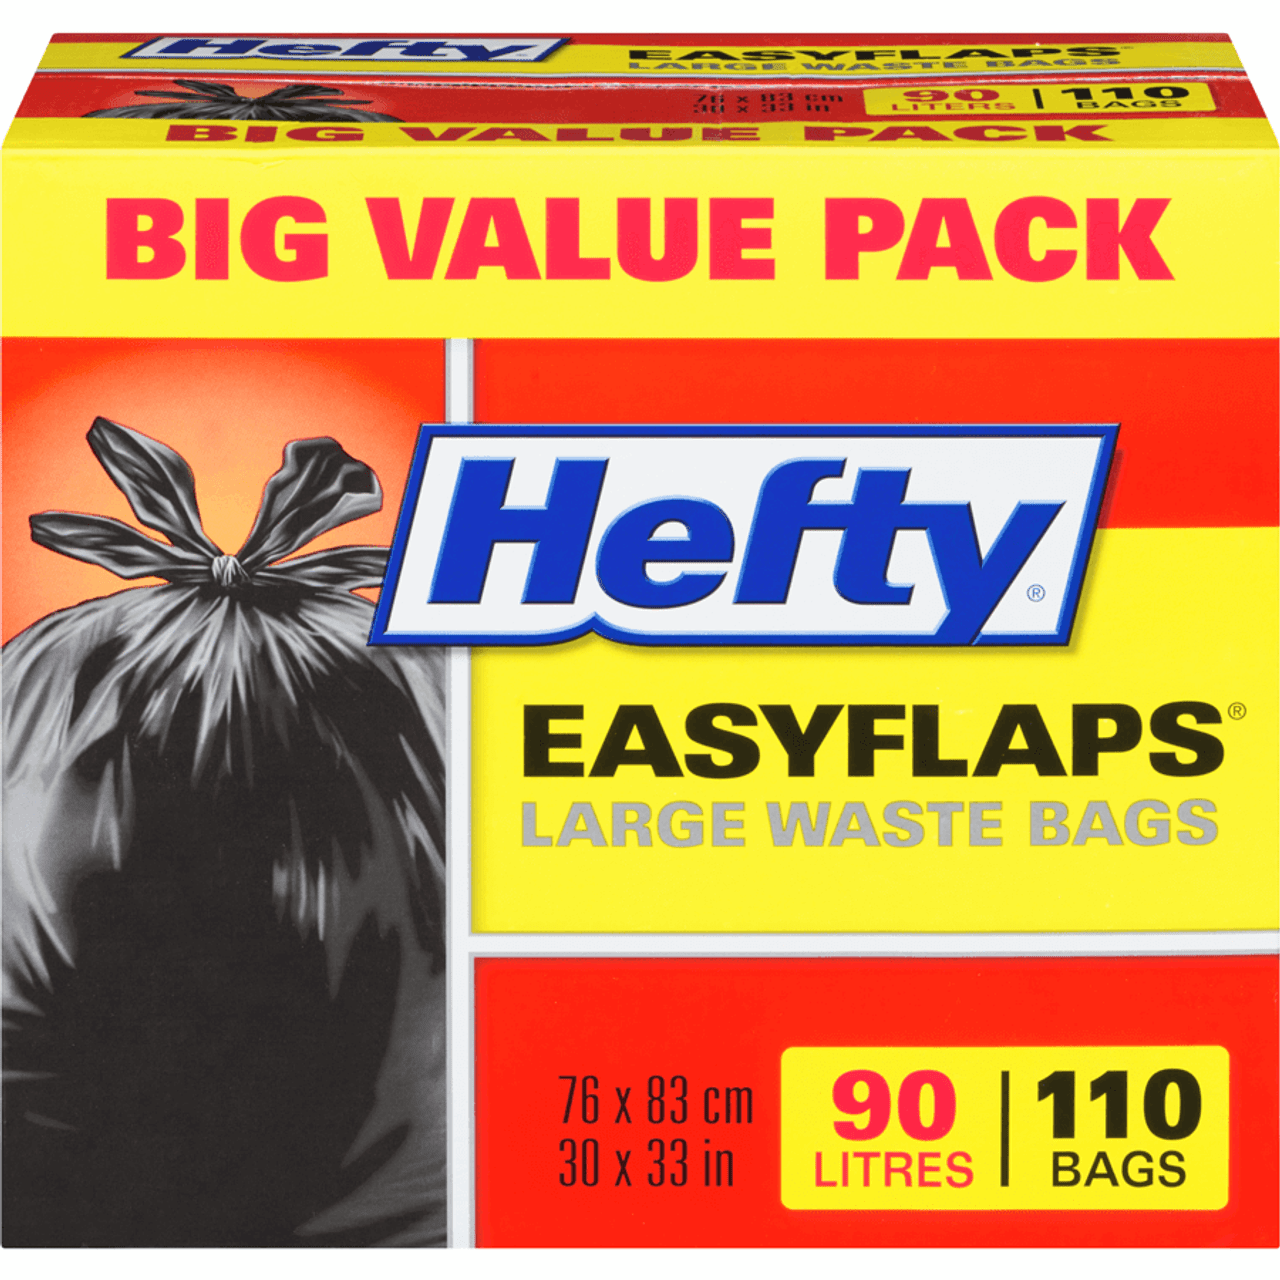 HEFTY Easyflaps Large Waste Bags - Big Value Pack, 90 L, 110 Bags(8/Case)-Chicken Pieces